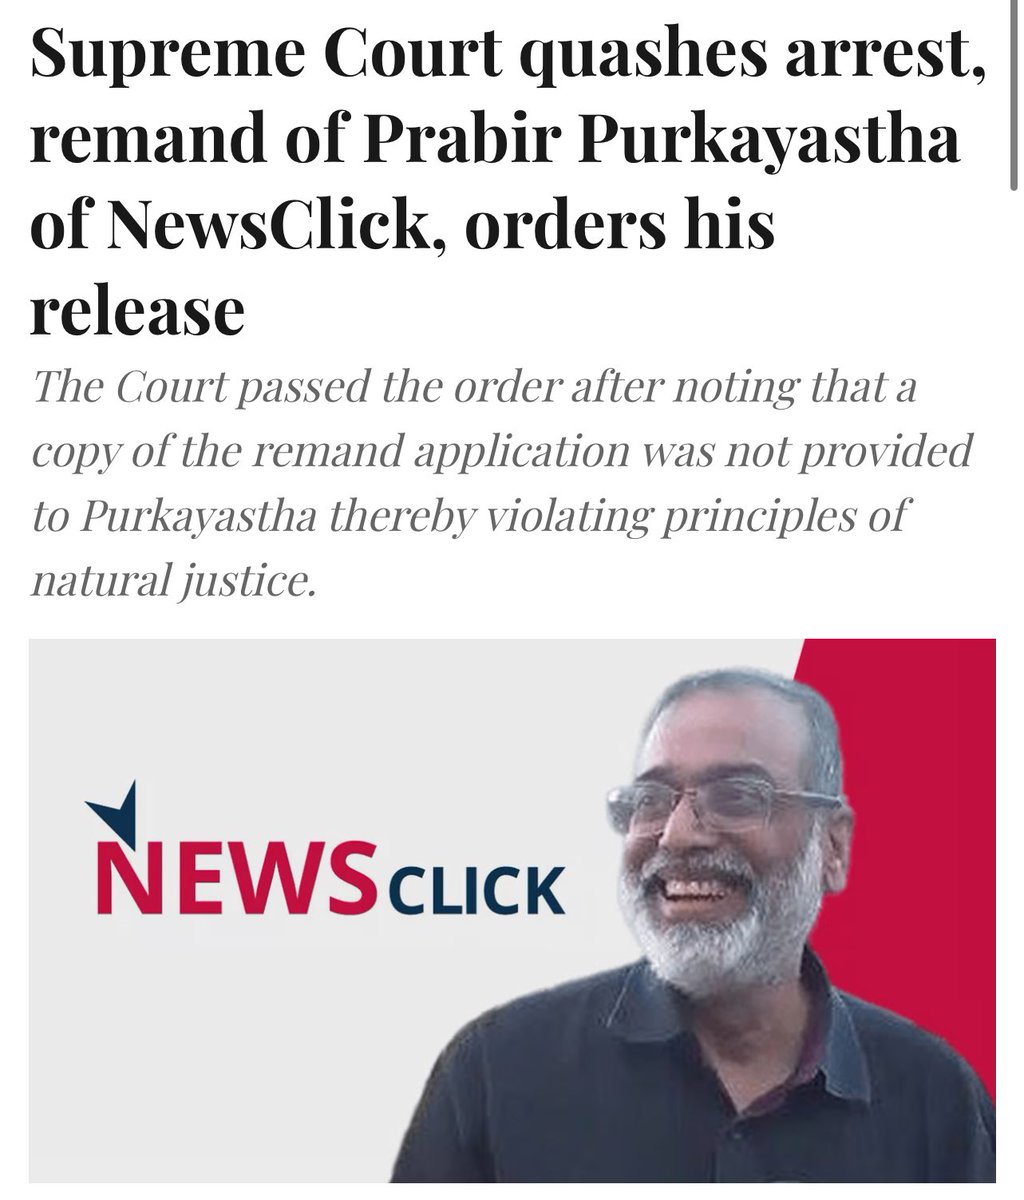 Another Gem from the MiLords of Supreme Court

Newsclick Founder Prabir Purkayastha released by SC! 

Newsclick just took money from Anti-India forces, they did nothing wrong